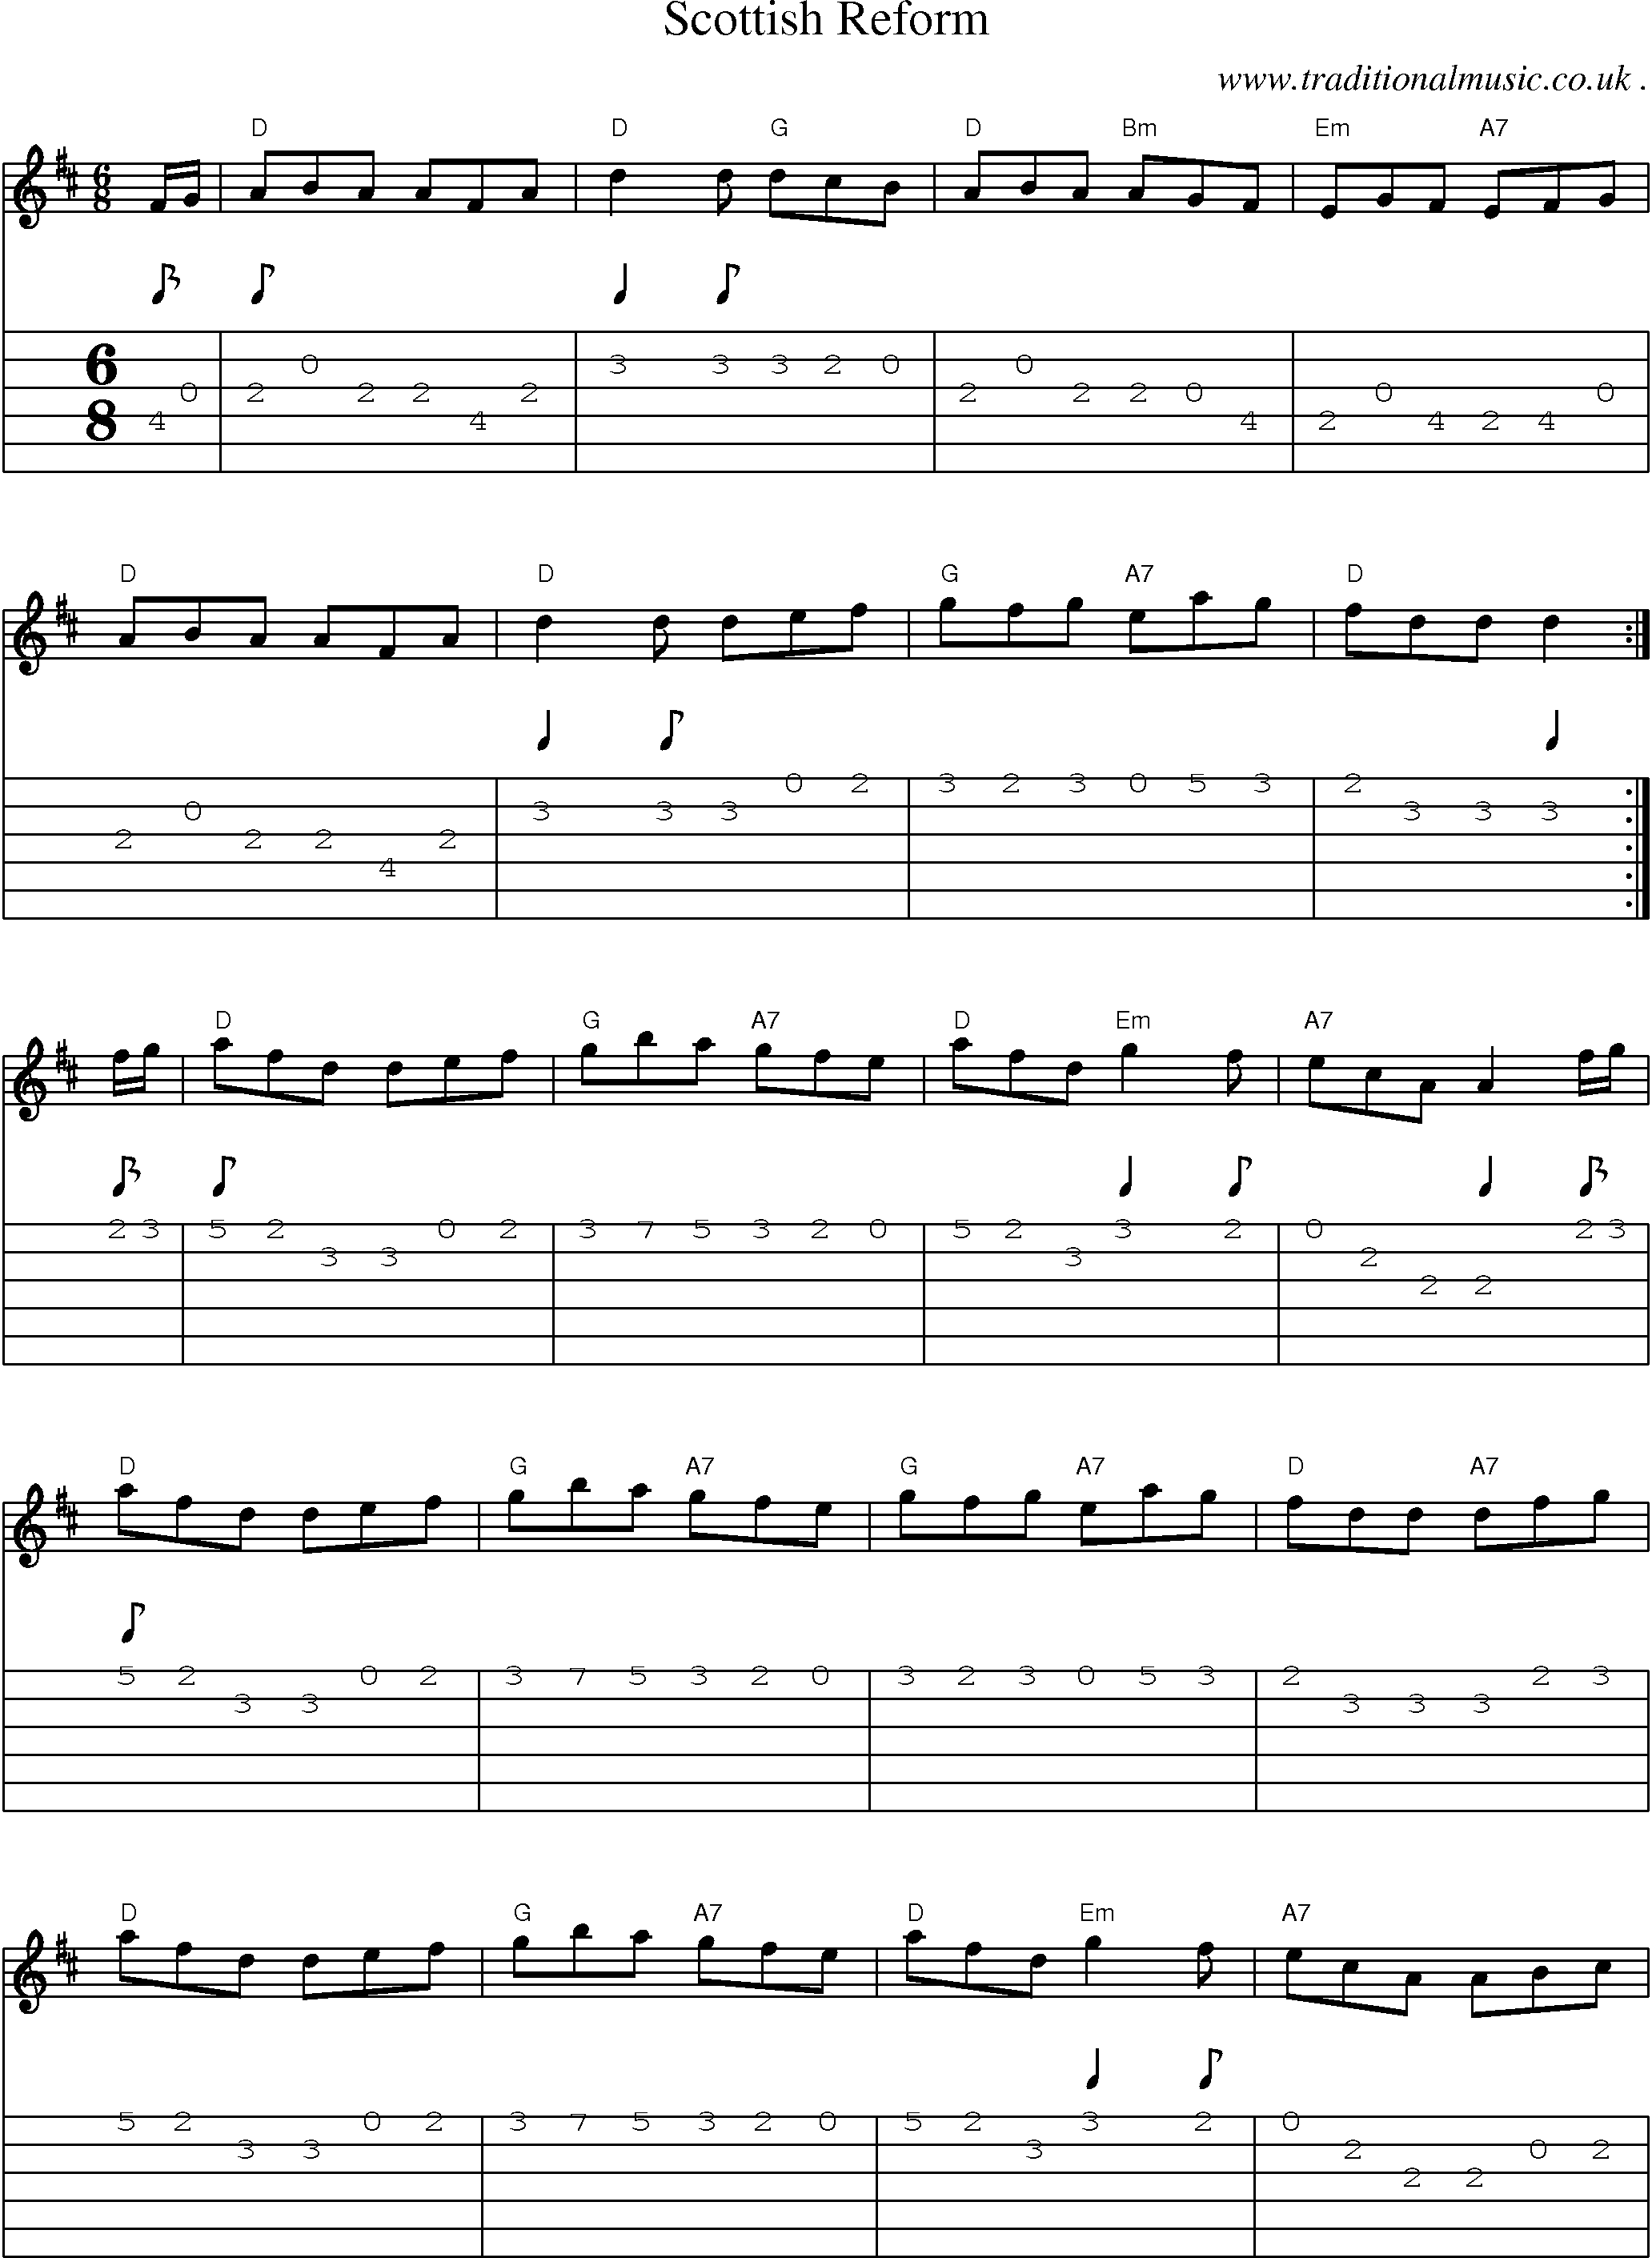 Music Score and Guitar Tabs for Scottish Reform